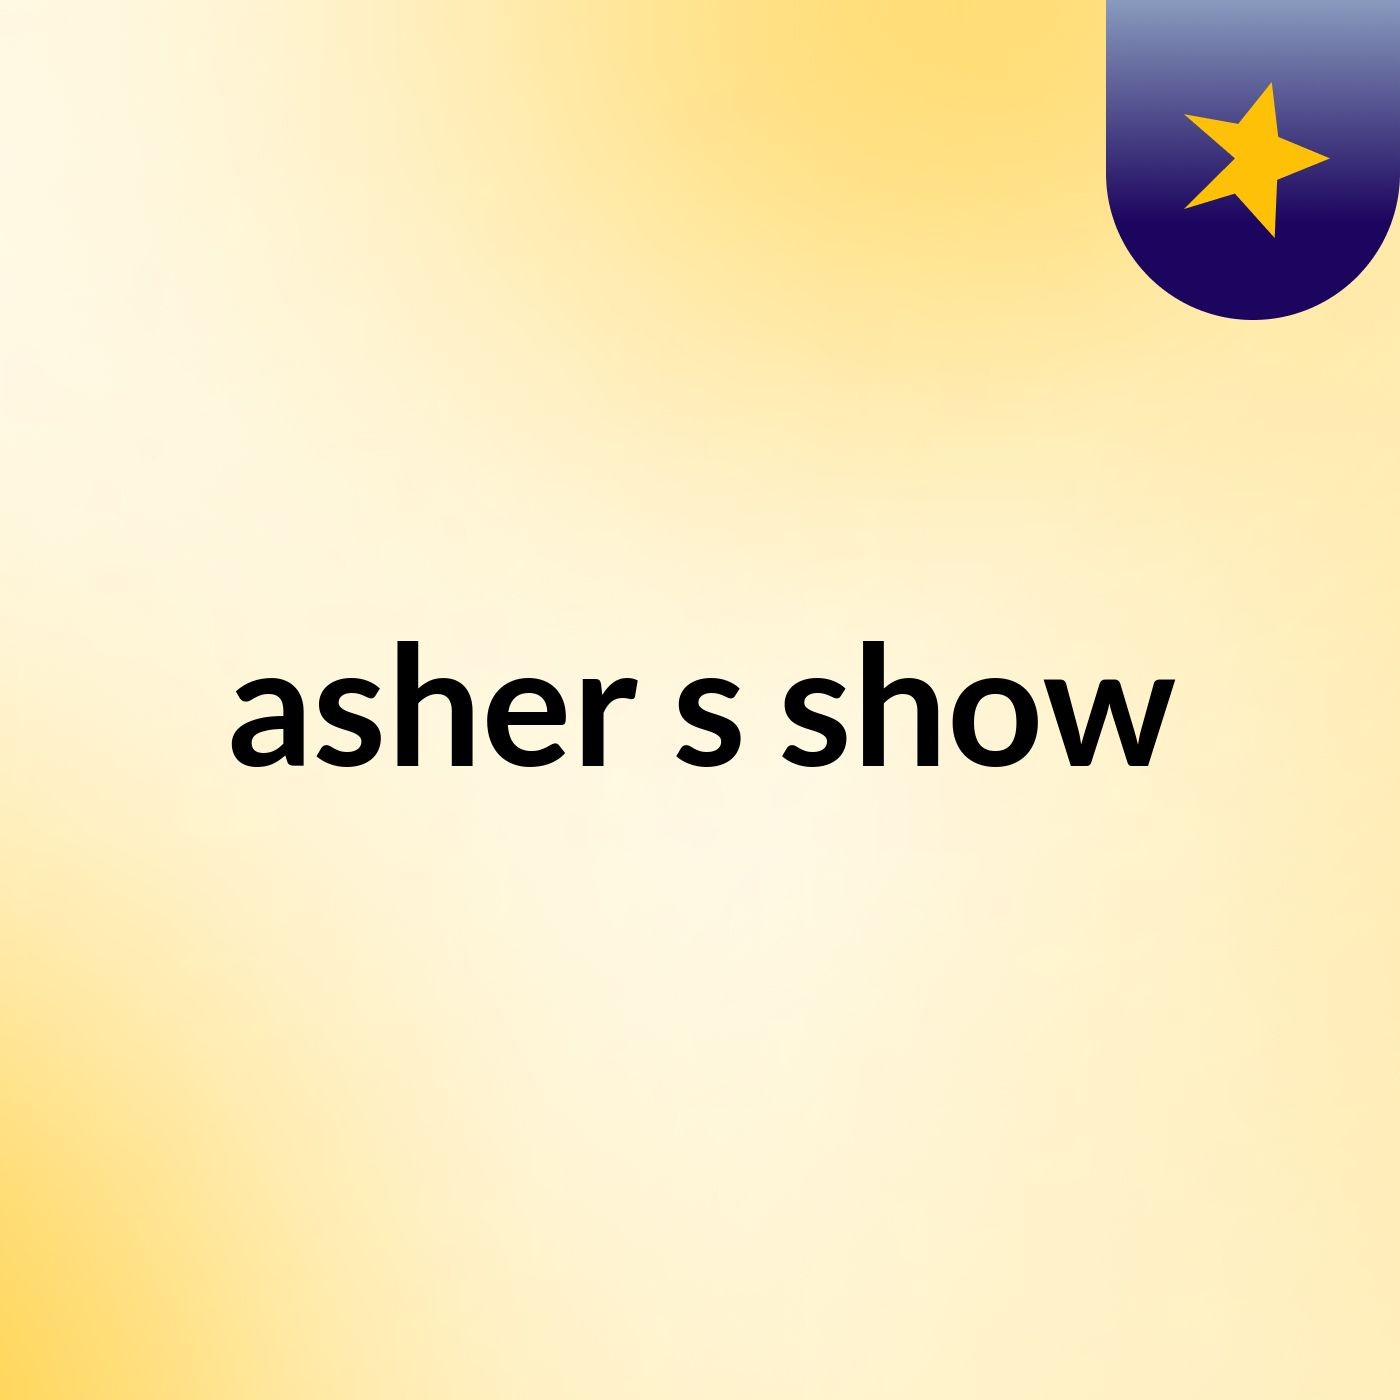 asher's show